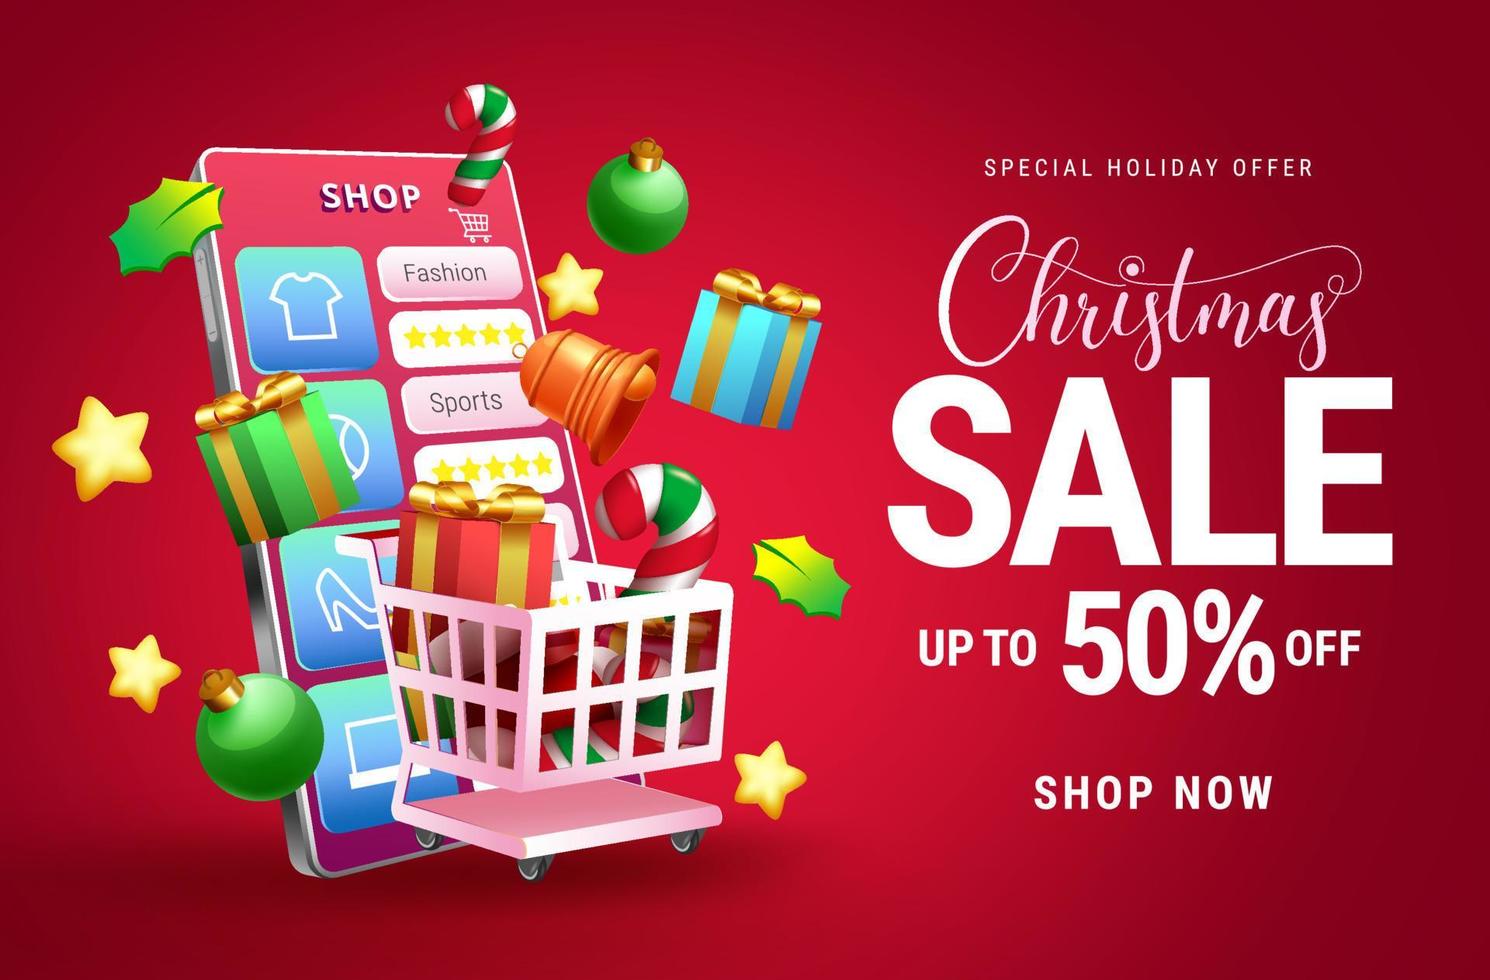 Christmas sale online vector banner. Christmas sale text with online shopping app in mobile phone discount for xmas order online promotion shop ads. Vector illustration.